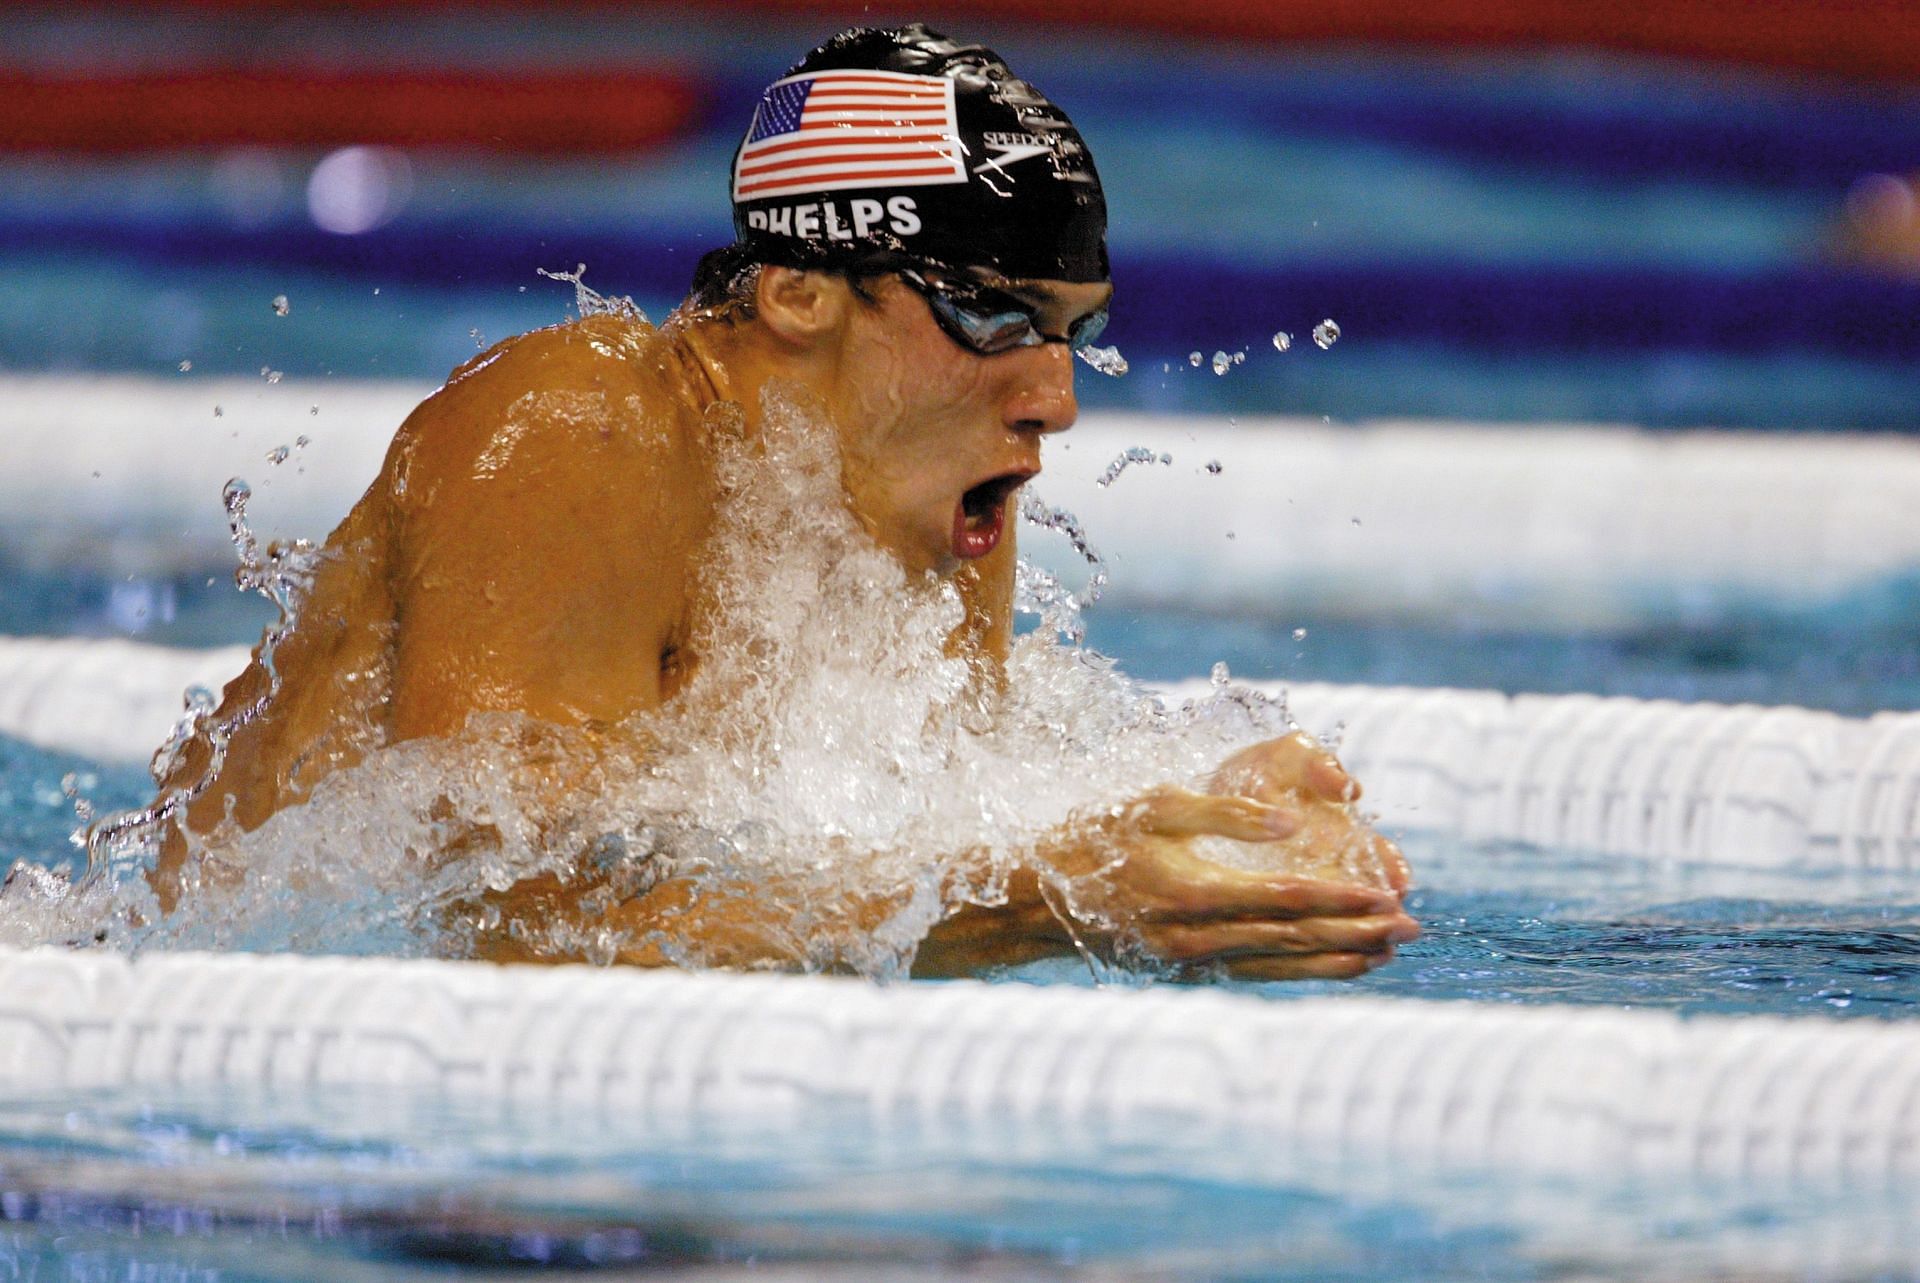 Michael Phelps of the USA competes during the Men&#039;s 200m Individual Medley Final during the 10th Fina World Swimming Championships 2003. (Photo by Shaun Botterill/Getty Images)